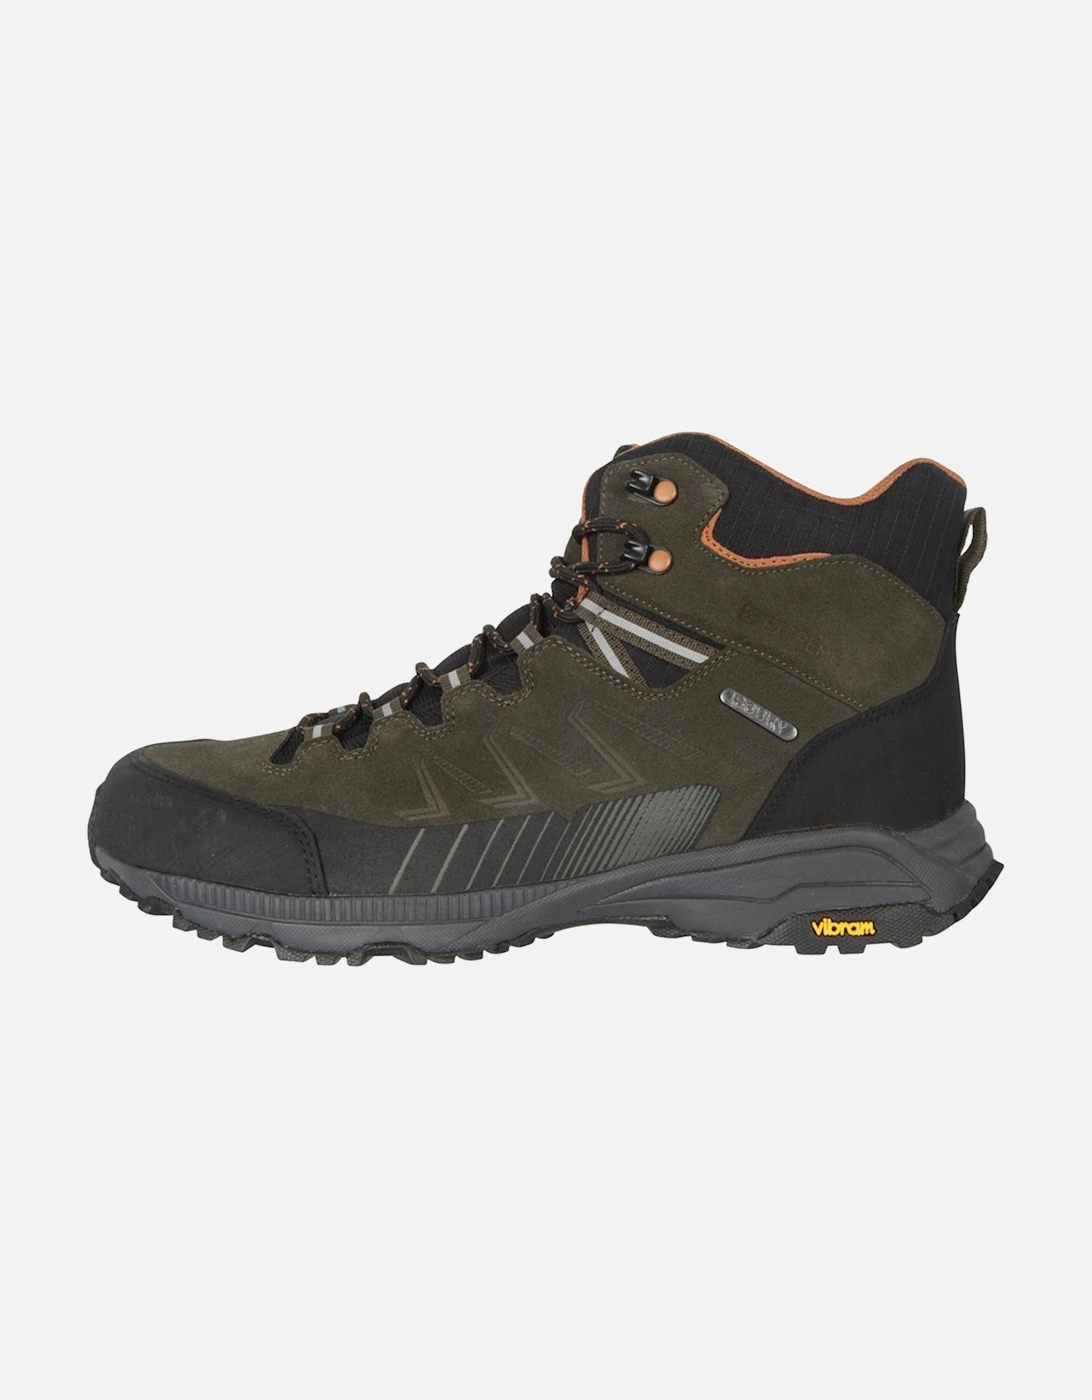 Mens Extreme Rockies Leather Walking Boots